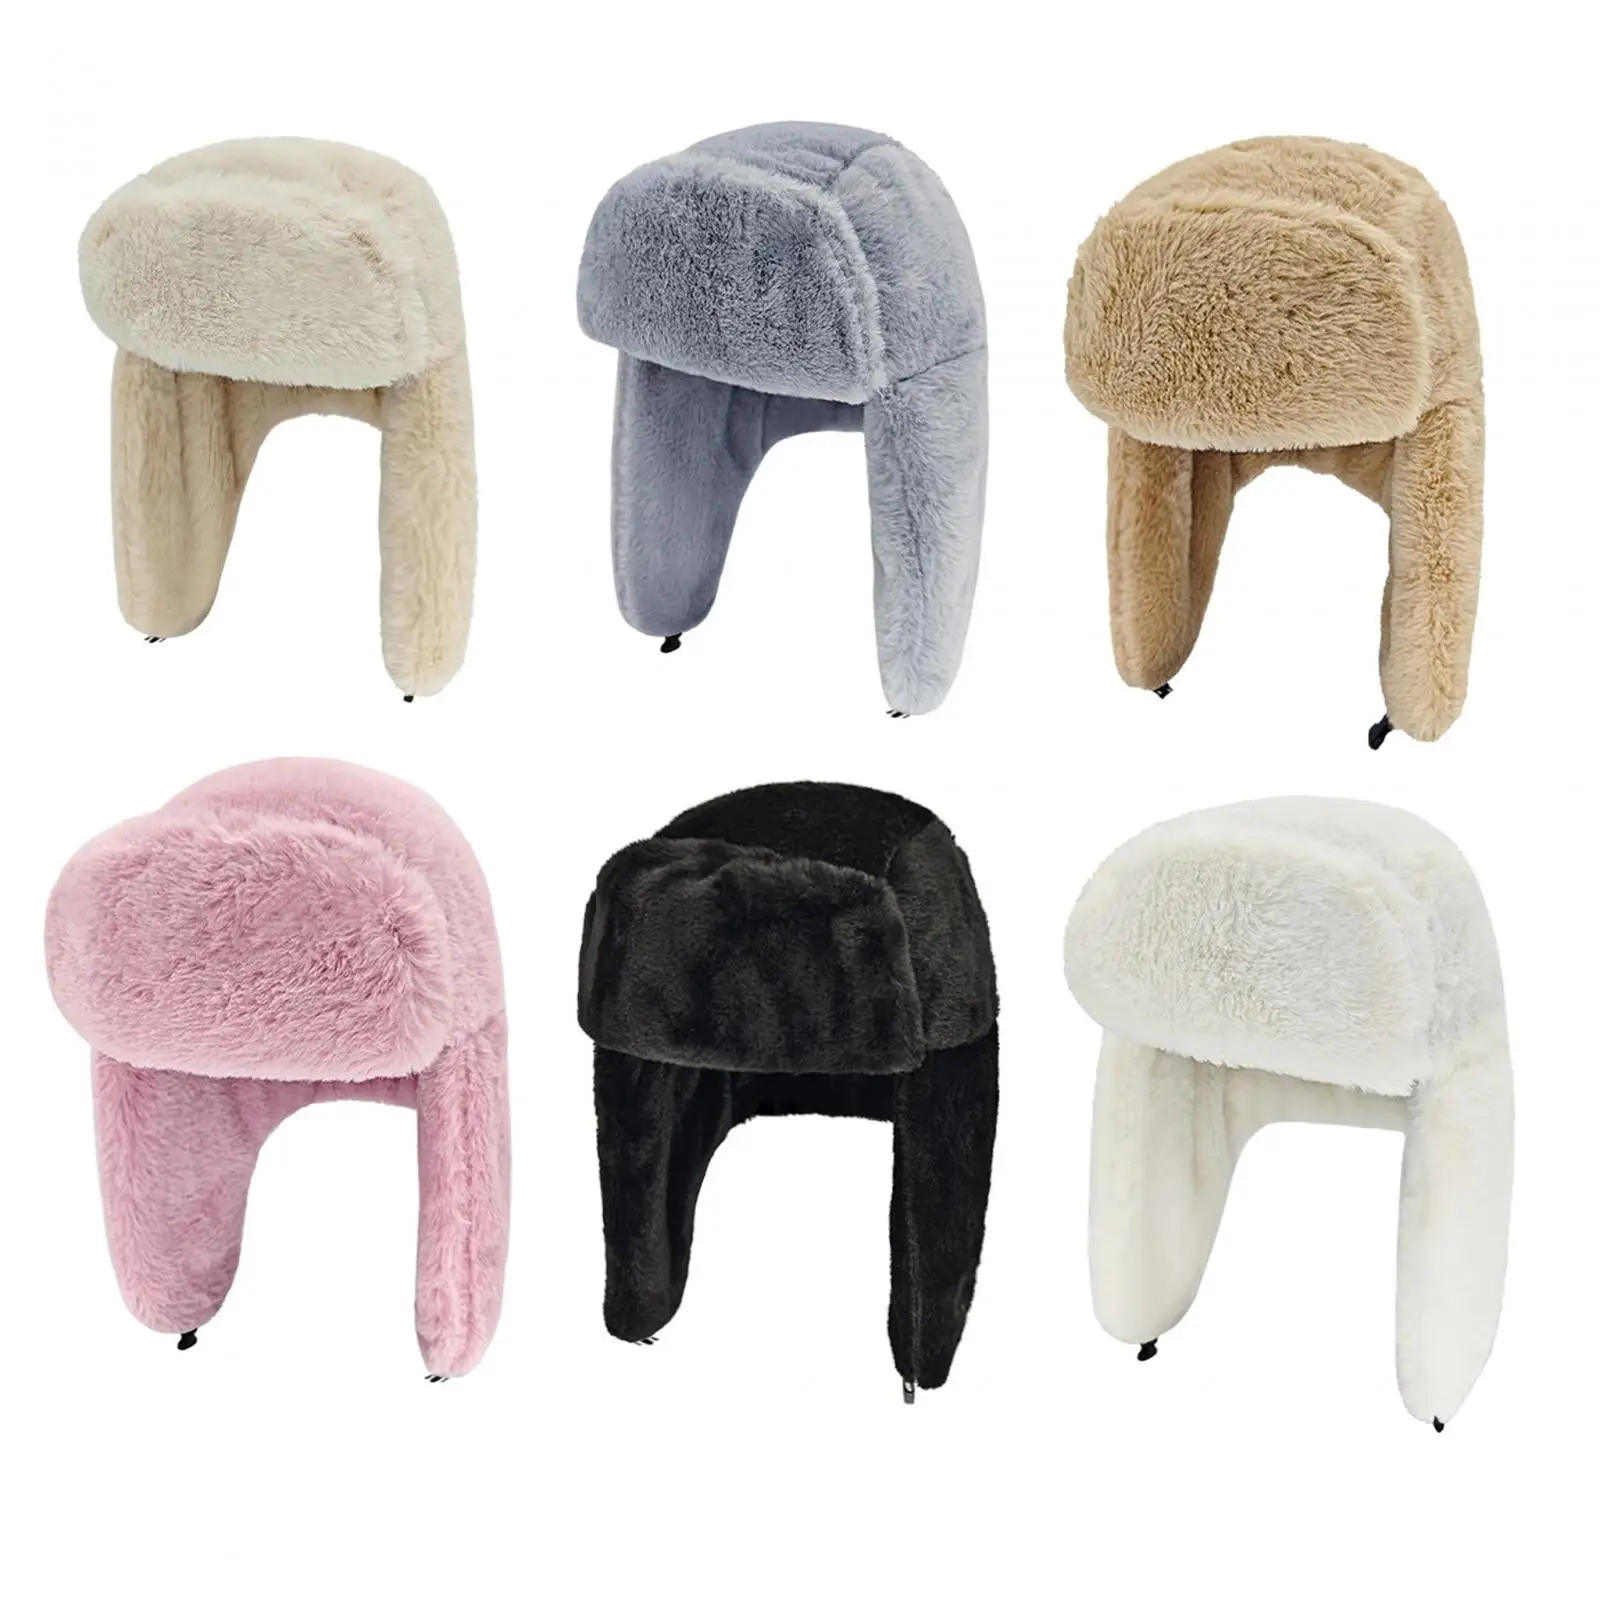 Winter Trapper Hats with Ear Flaps Cold Weather Thickened Plush Ski Caps Winter Warm Hat for Adults Unisex Skiing Hiking Skating